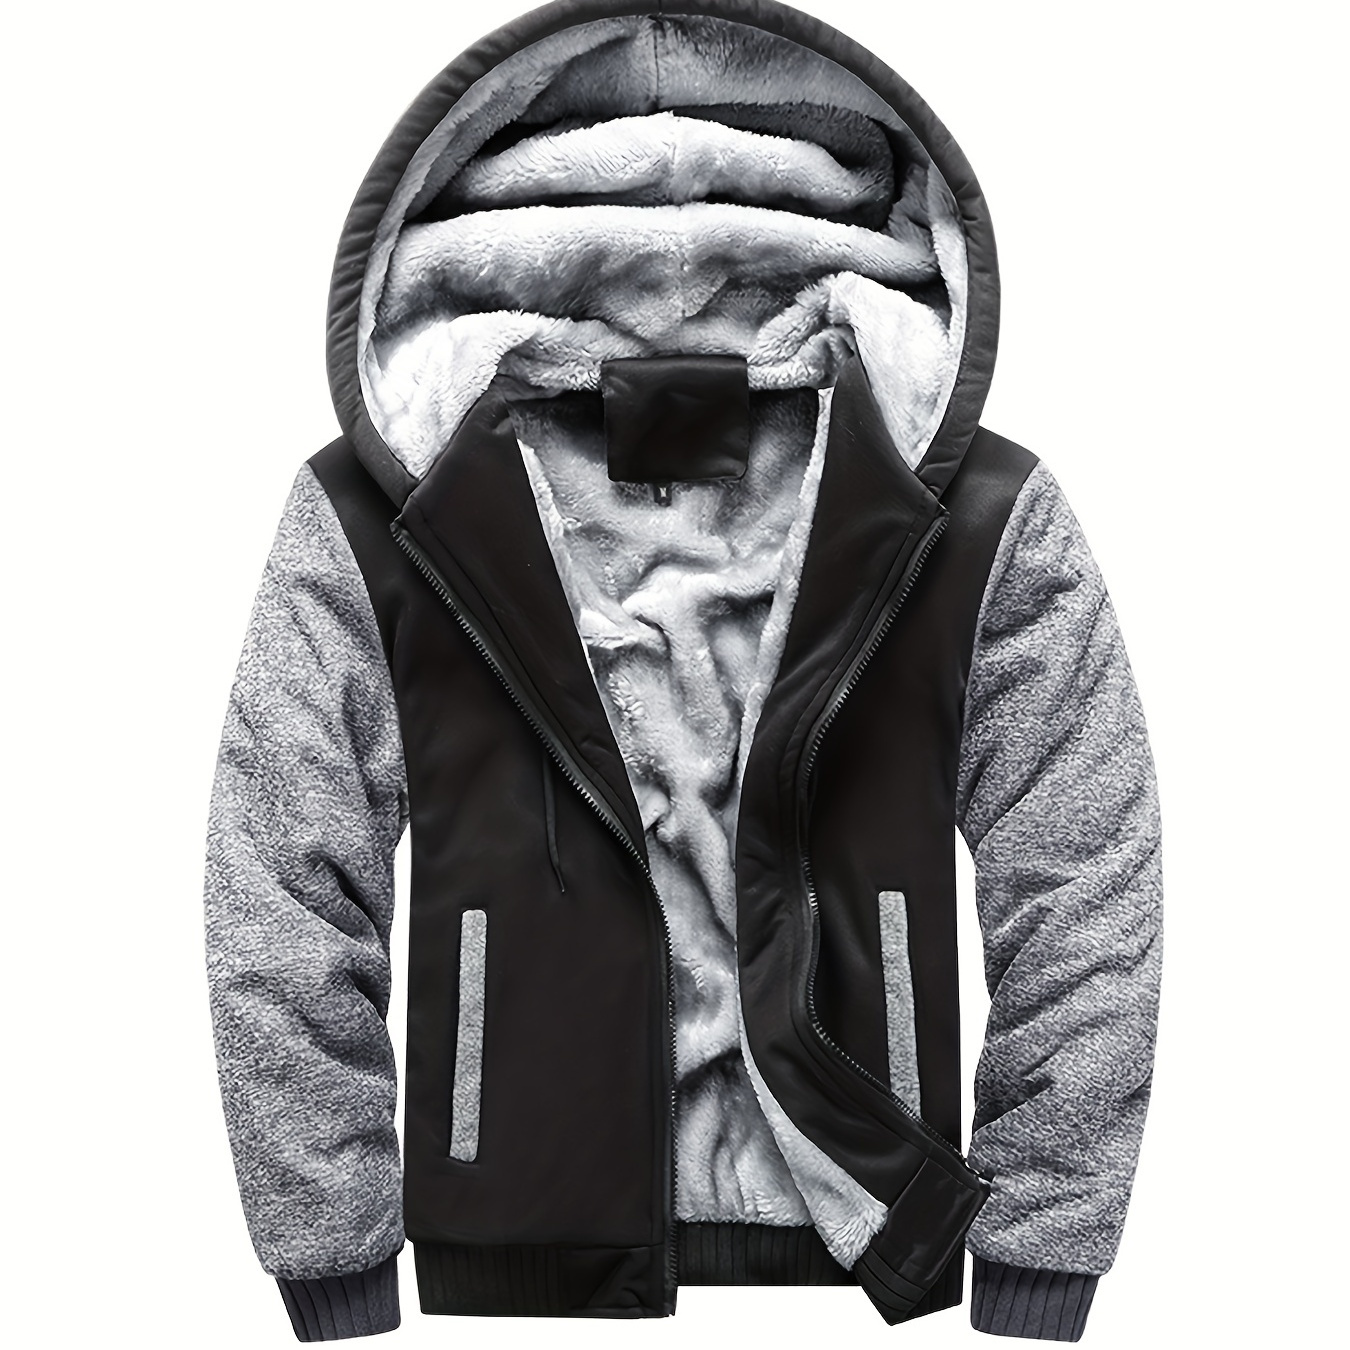 

Color Block Sherpa Lined Men's Hooded Jacket, Casual Long Sleeve Hoodies With Zipper, Gym Sports Hooded Coat For Winter Fall